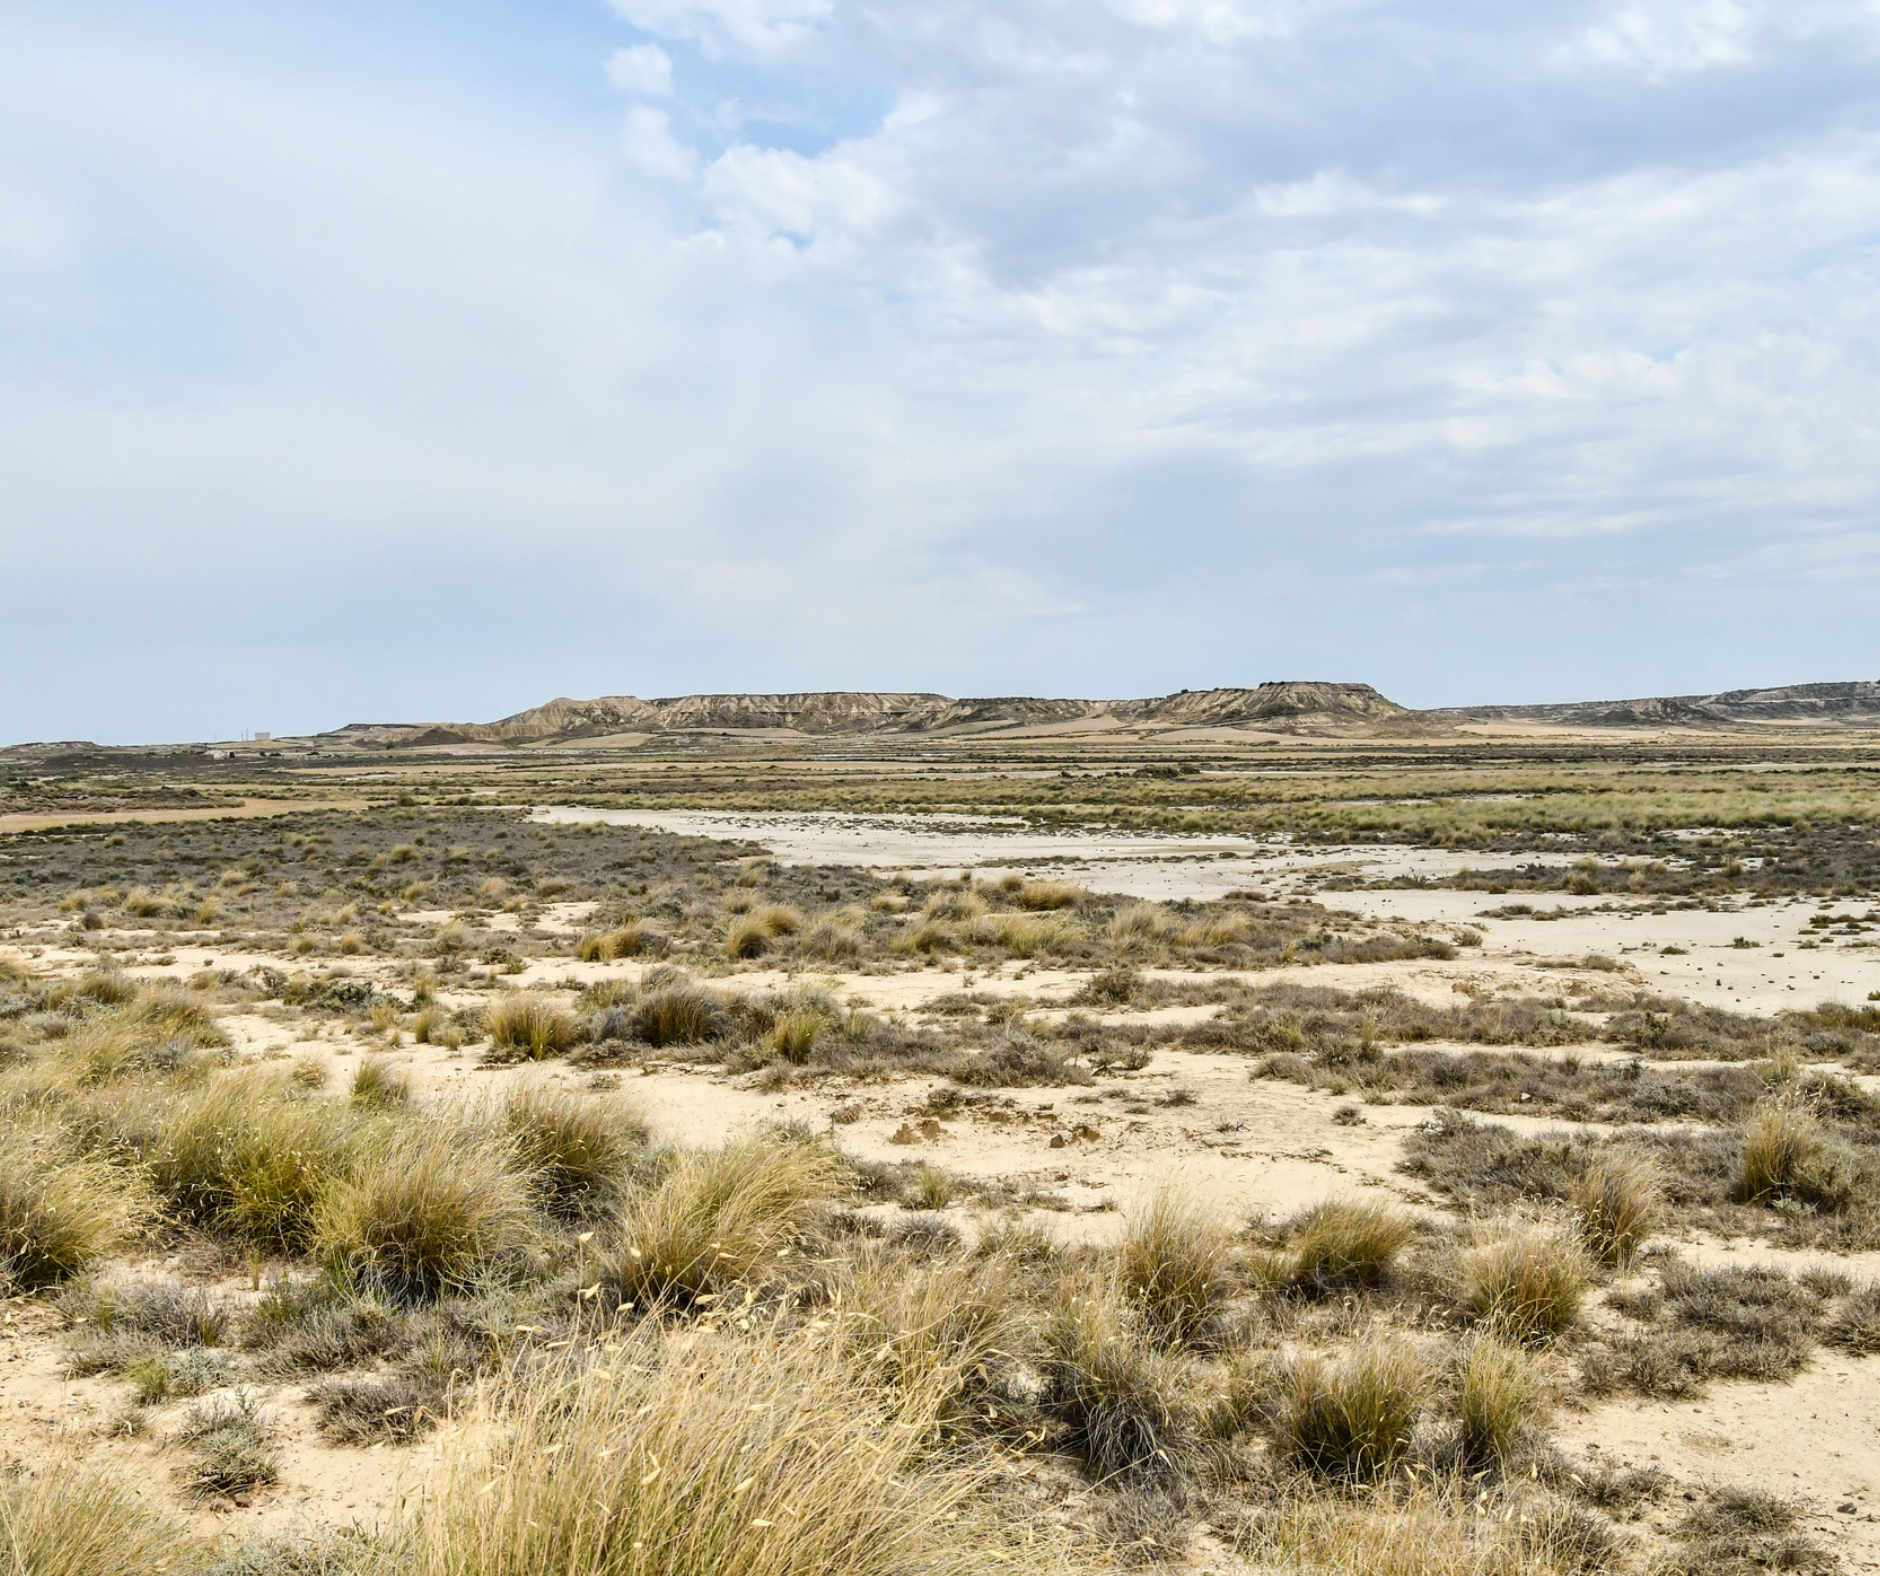  Less than 4% of dryland areas will turn into desert under climate change, new study shows